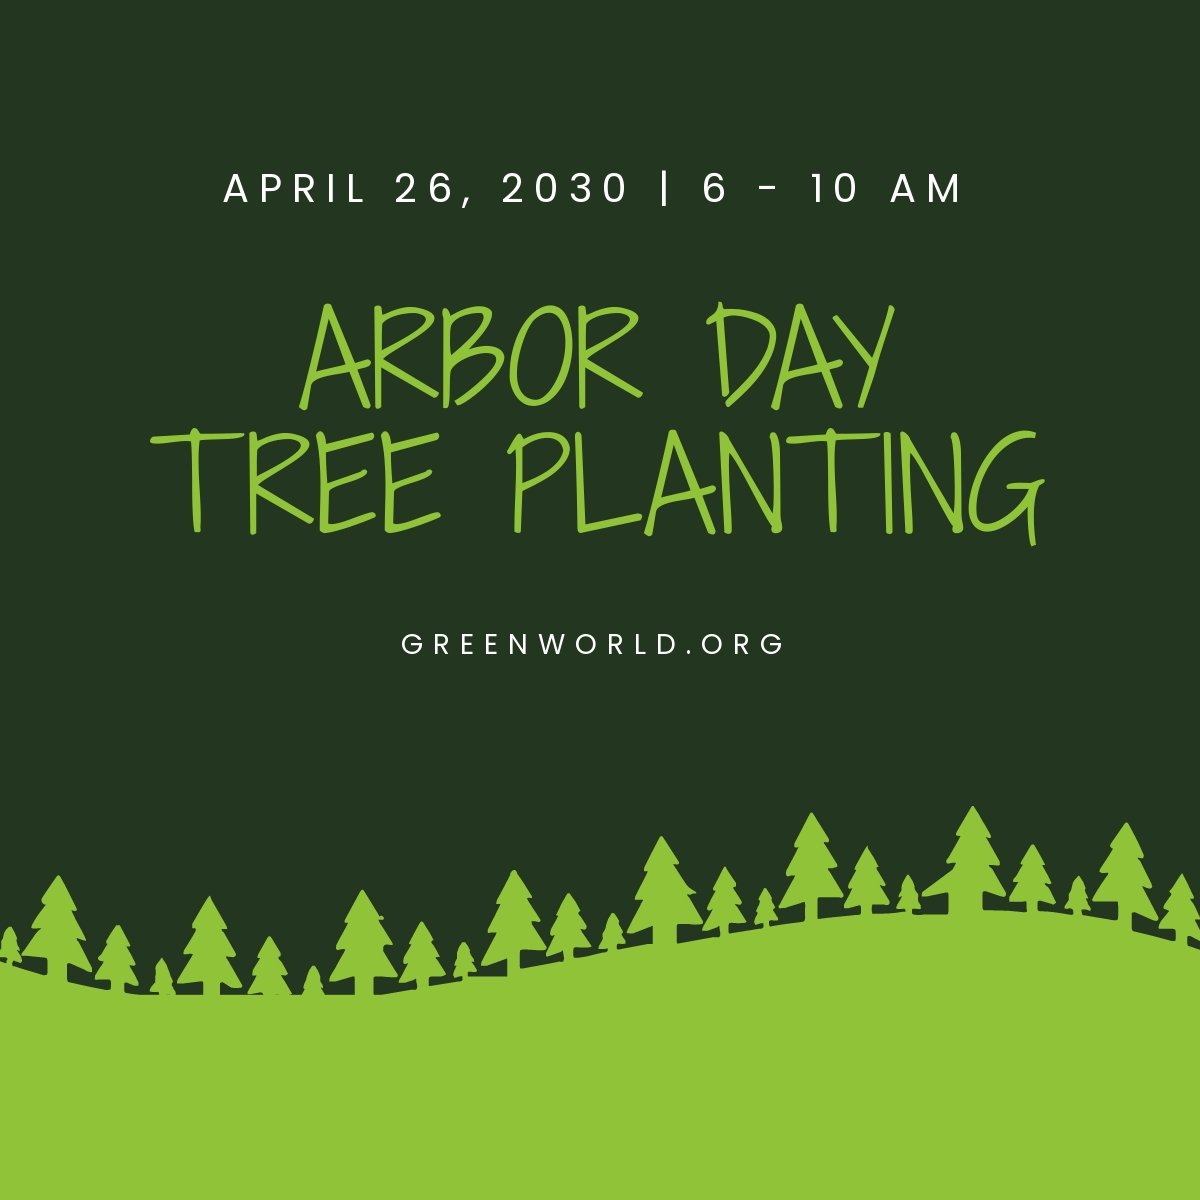 Arbor Day Facebook Event Cover Template PSD